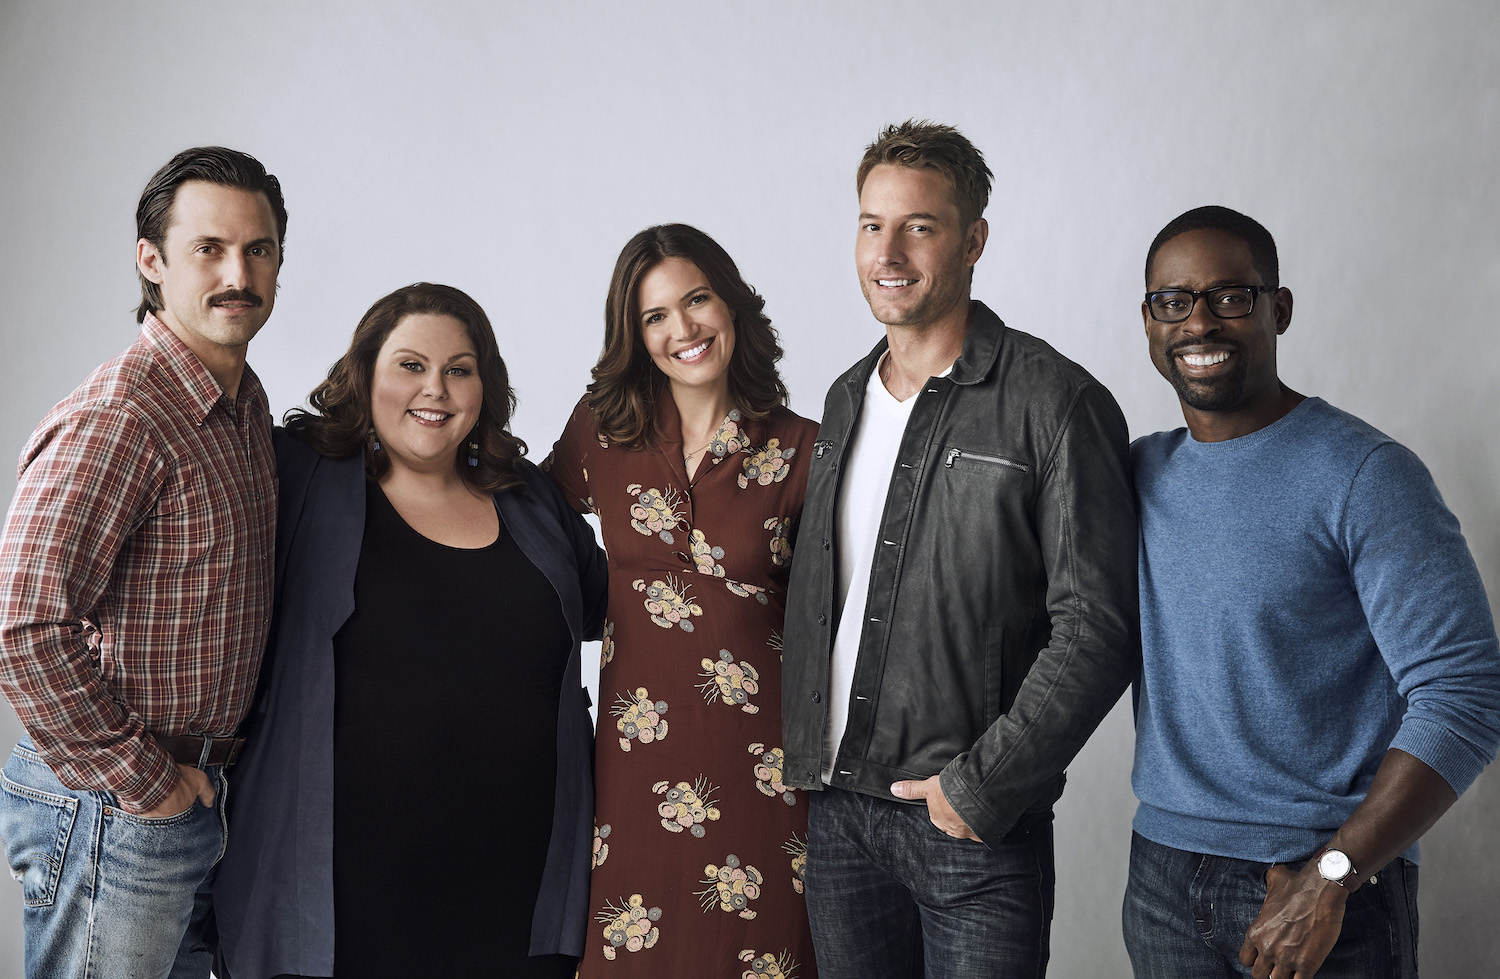 'This Is Us' cast Milo Ventimiglia, Chrissy Metz, Mandy Moore, Justin Hartley, and Sterling K. Brown